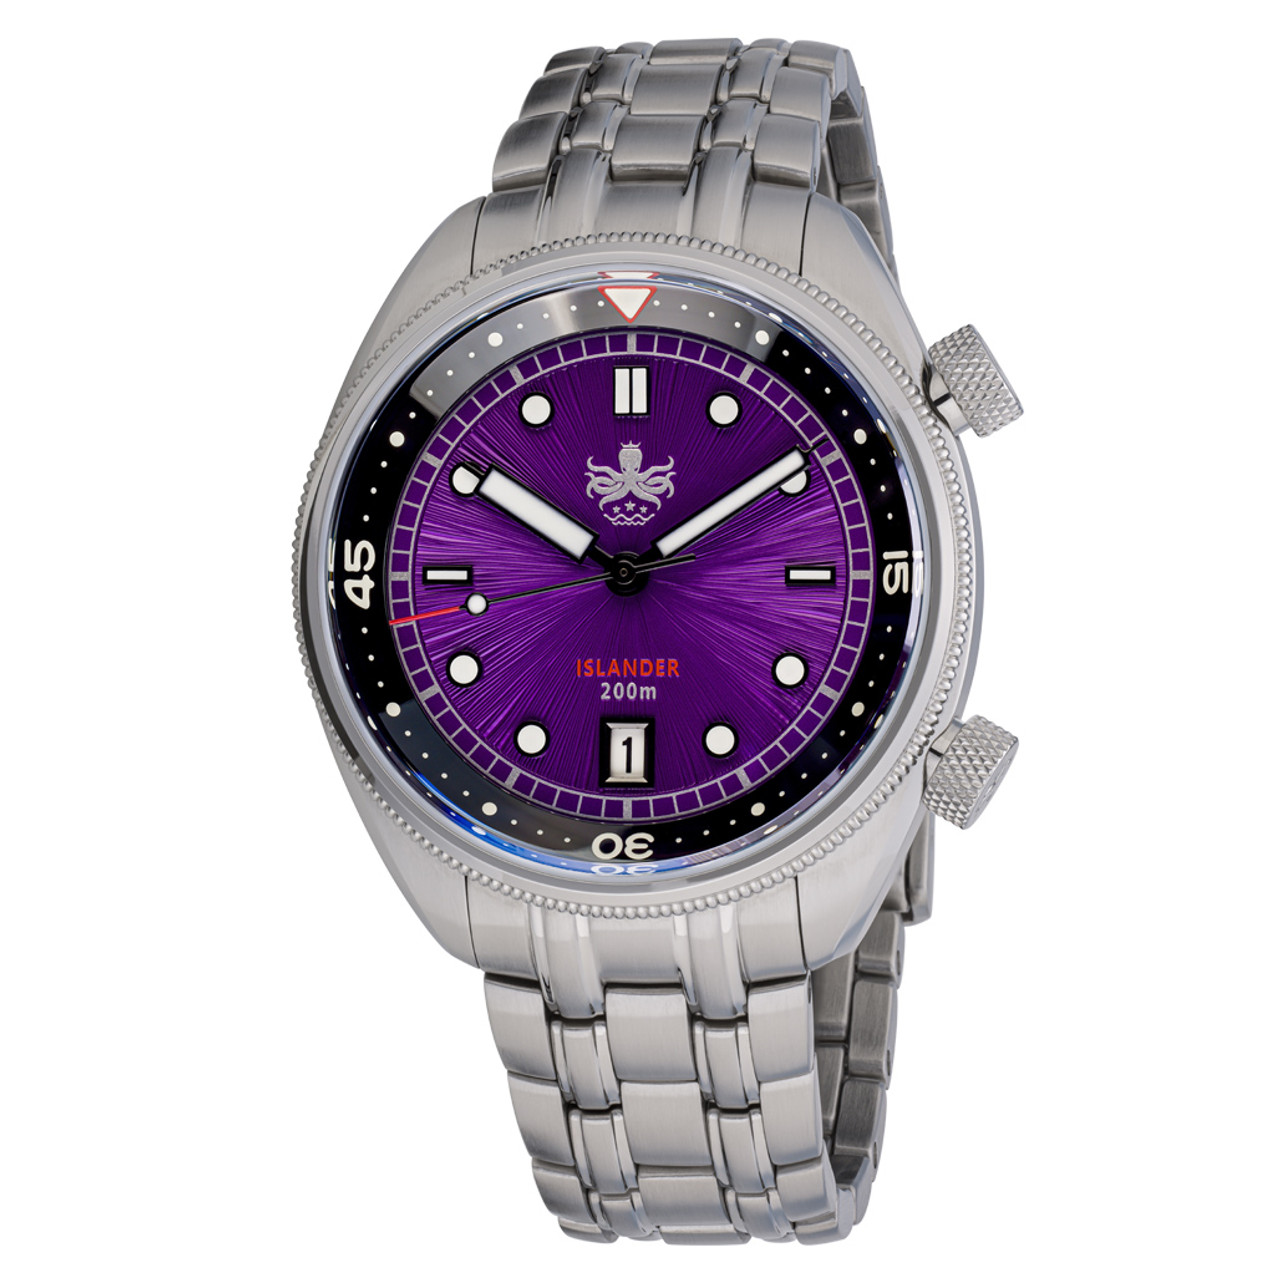 PHOIBOS x ISLANDER Limited Edition Eagle Ray Dive Watch with Sunburst  Purple Dial #PY039-LIW22